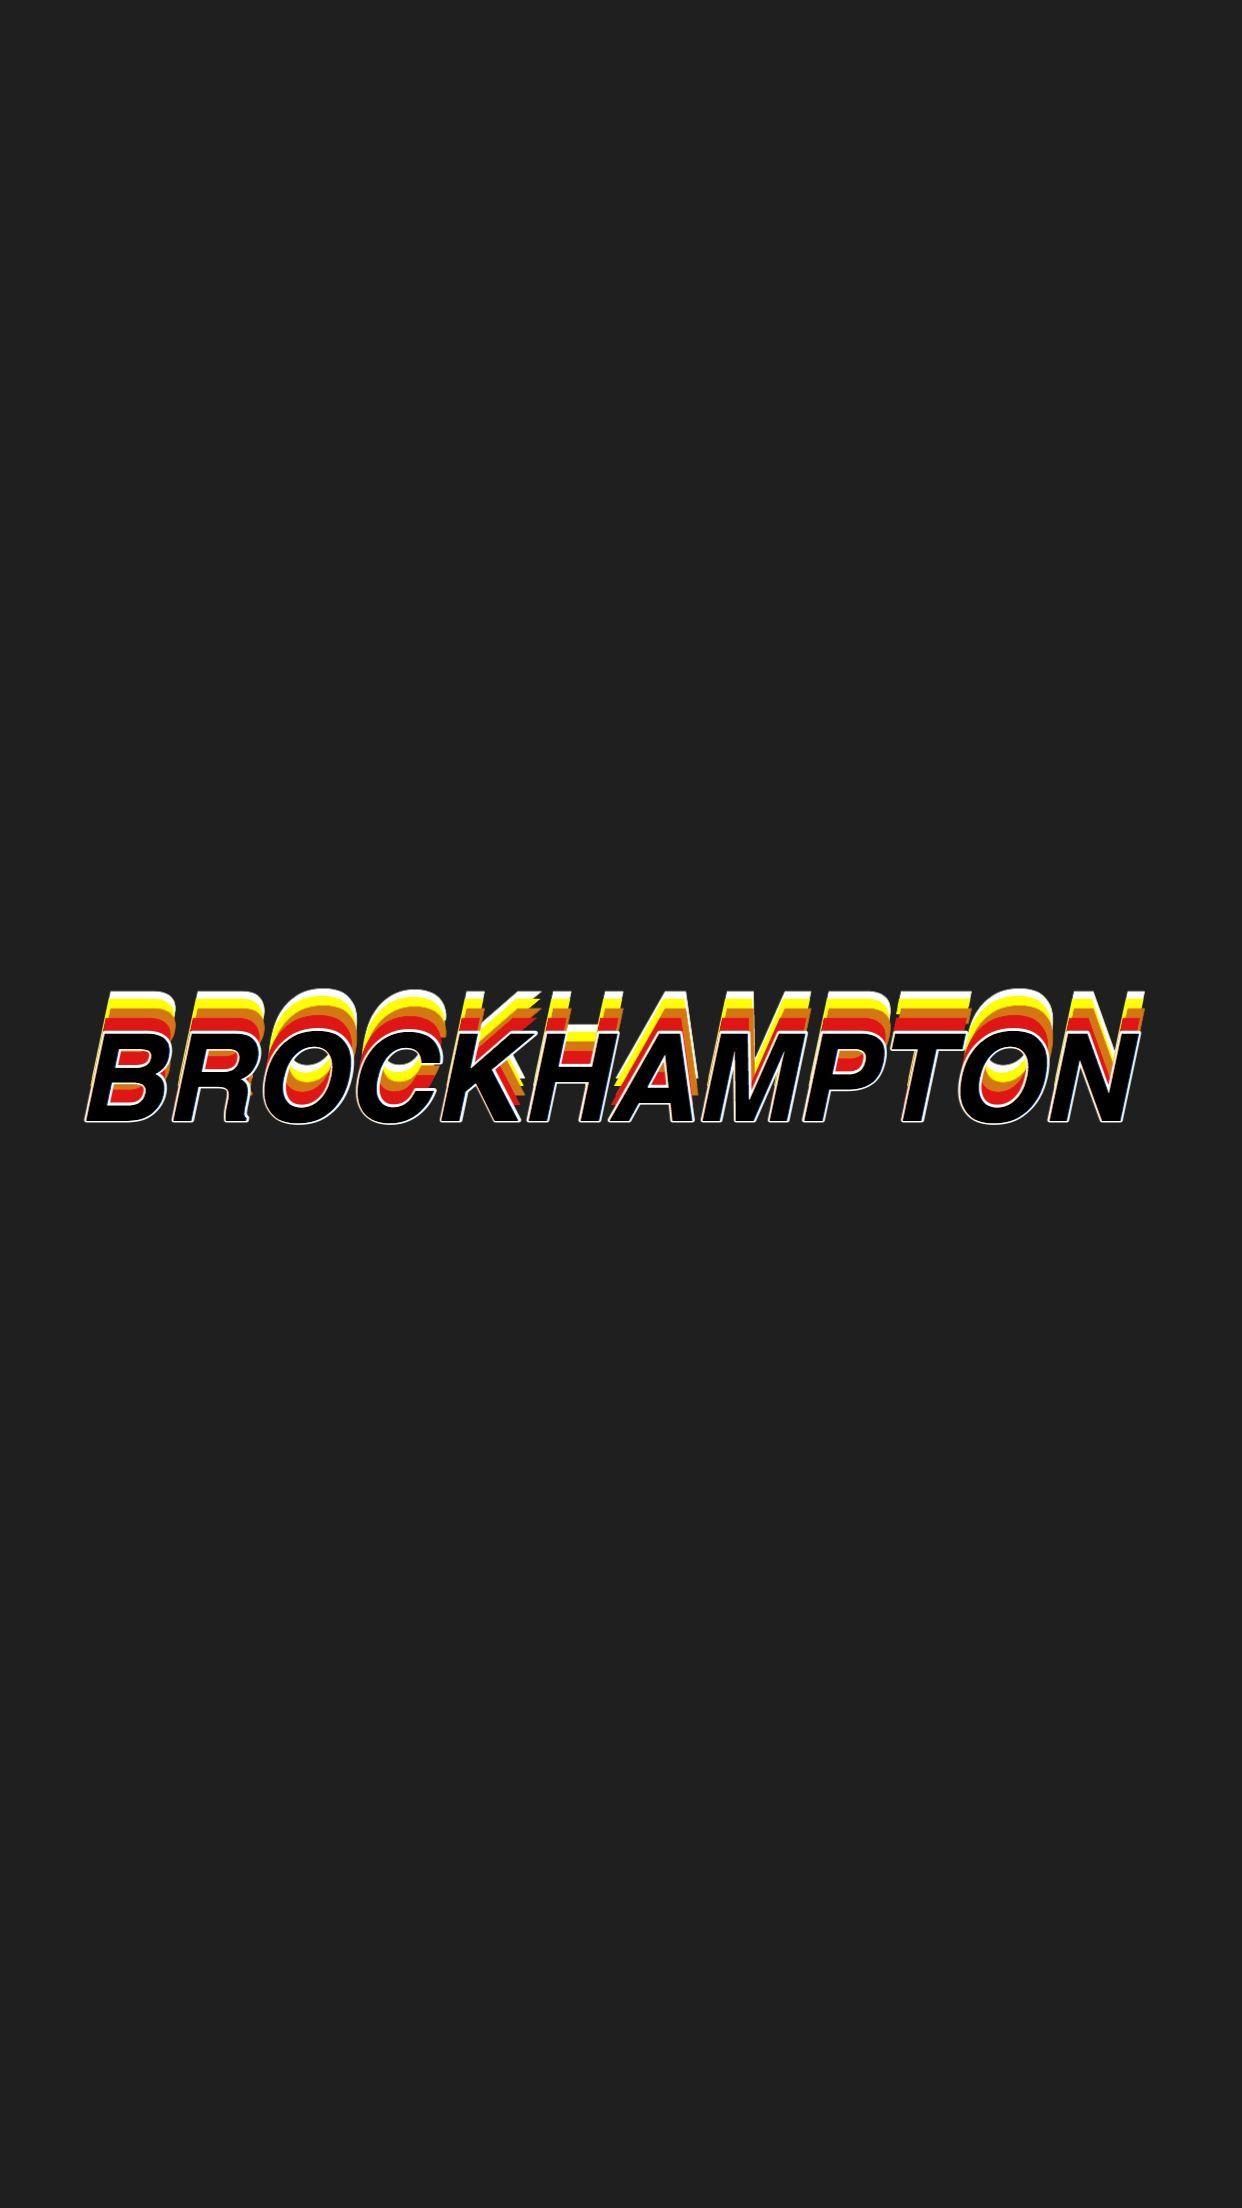 Brockhampton Logo - Brockhampton | BROCKHAMPTON <3 in 2019 | Aesthetic wallpapers, Music ...